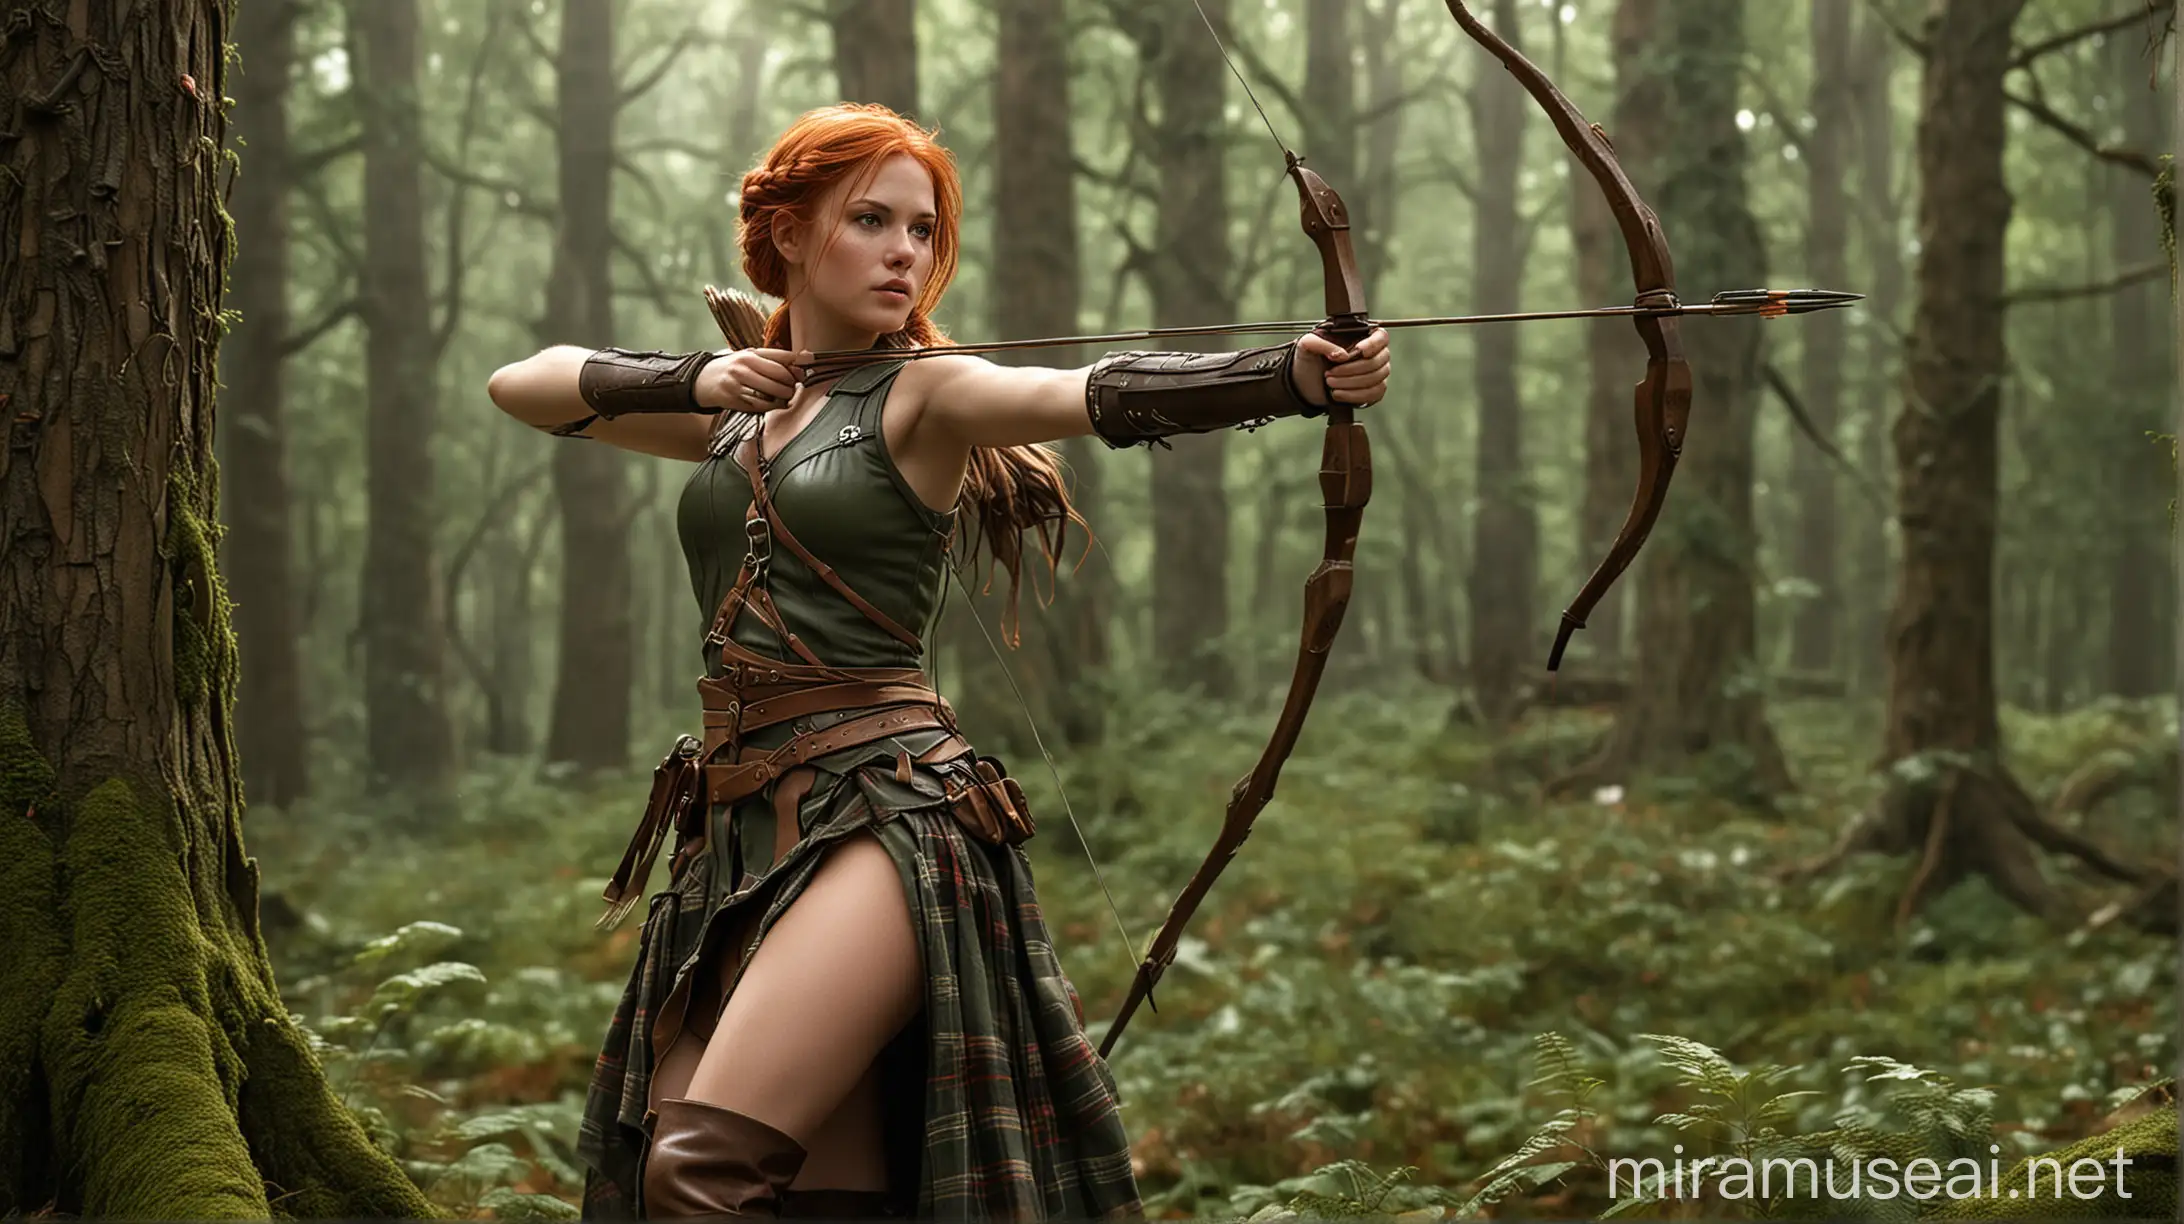 Fiery RedHaired Archer Woman Aiming at Designer Purse in Enchanted Forest